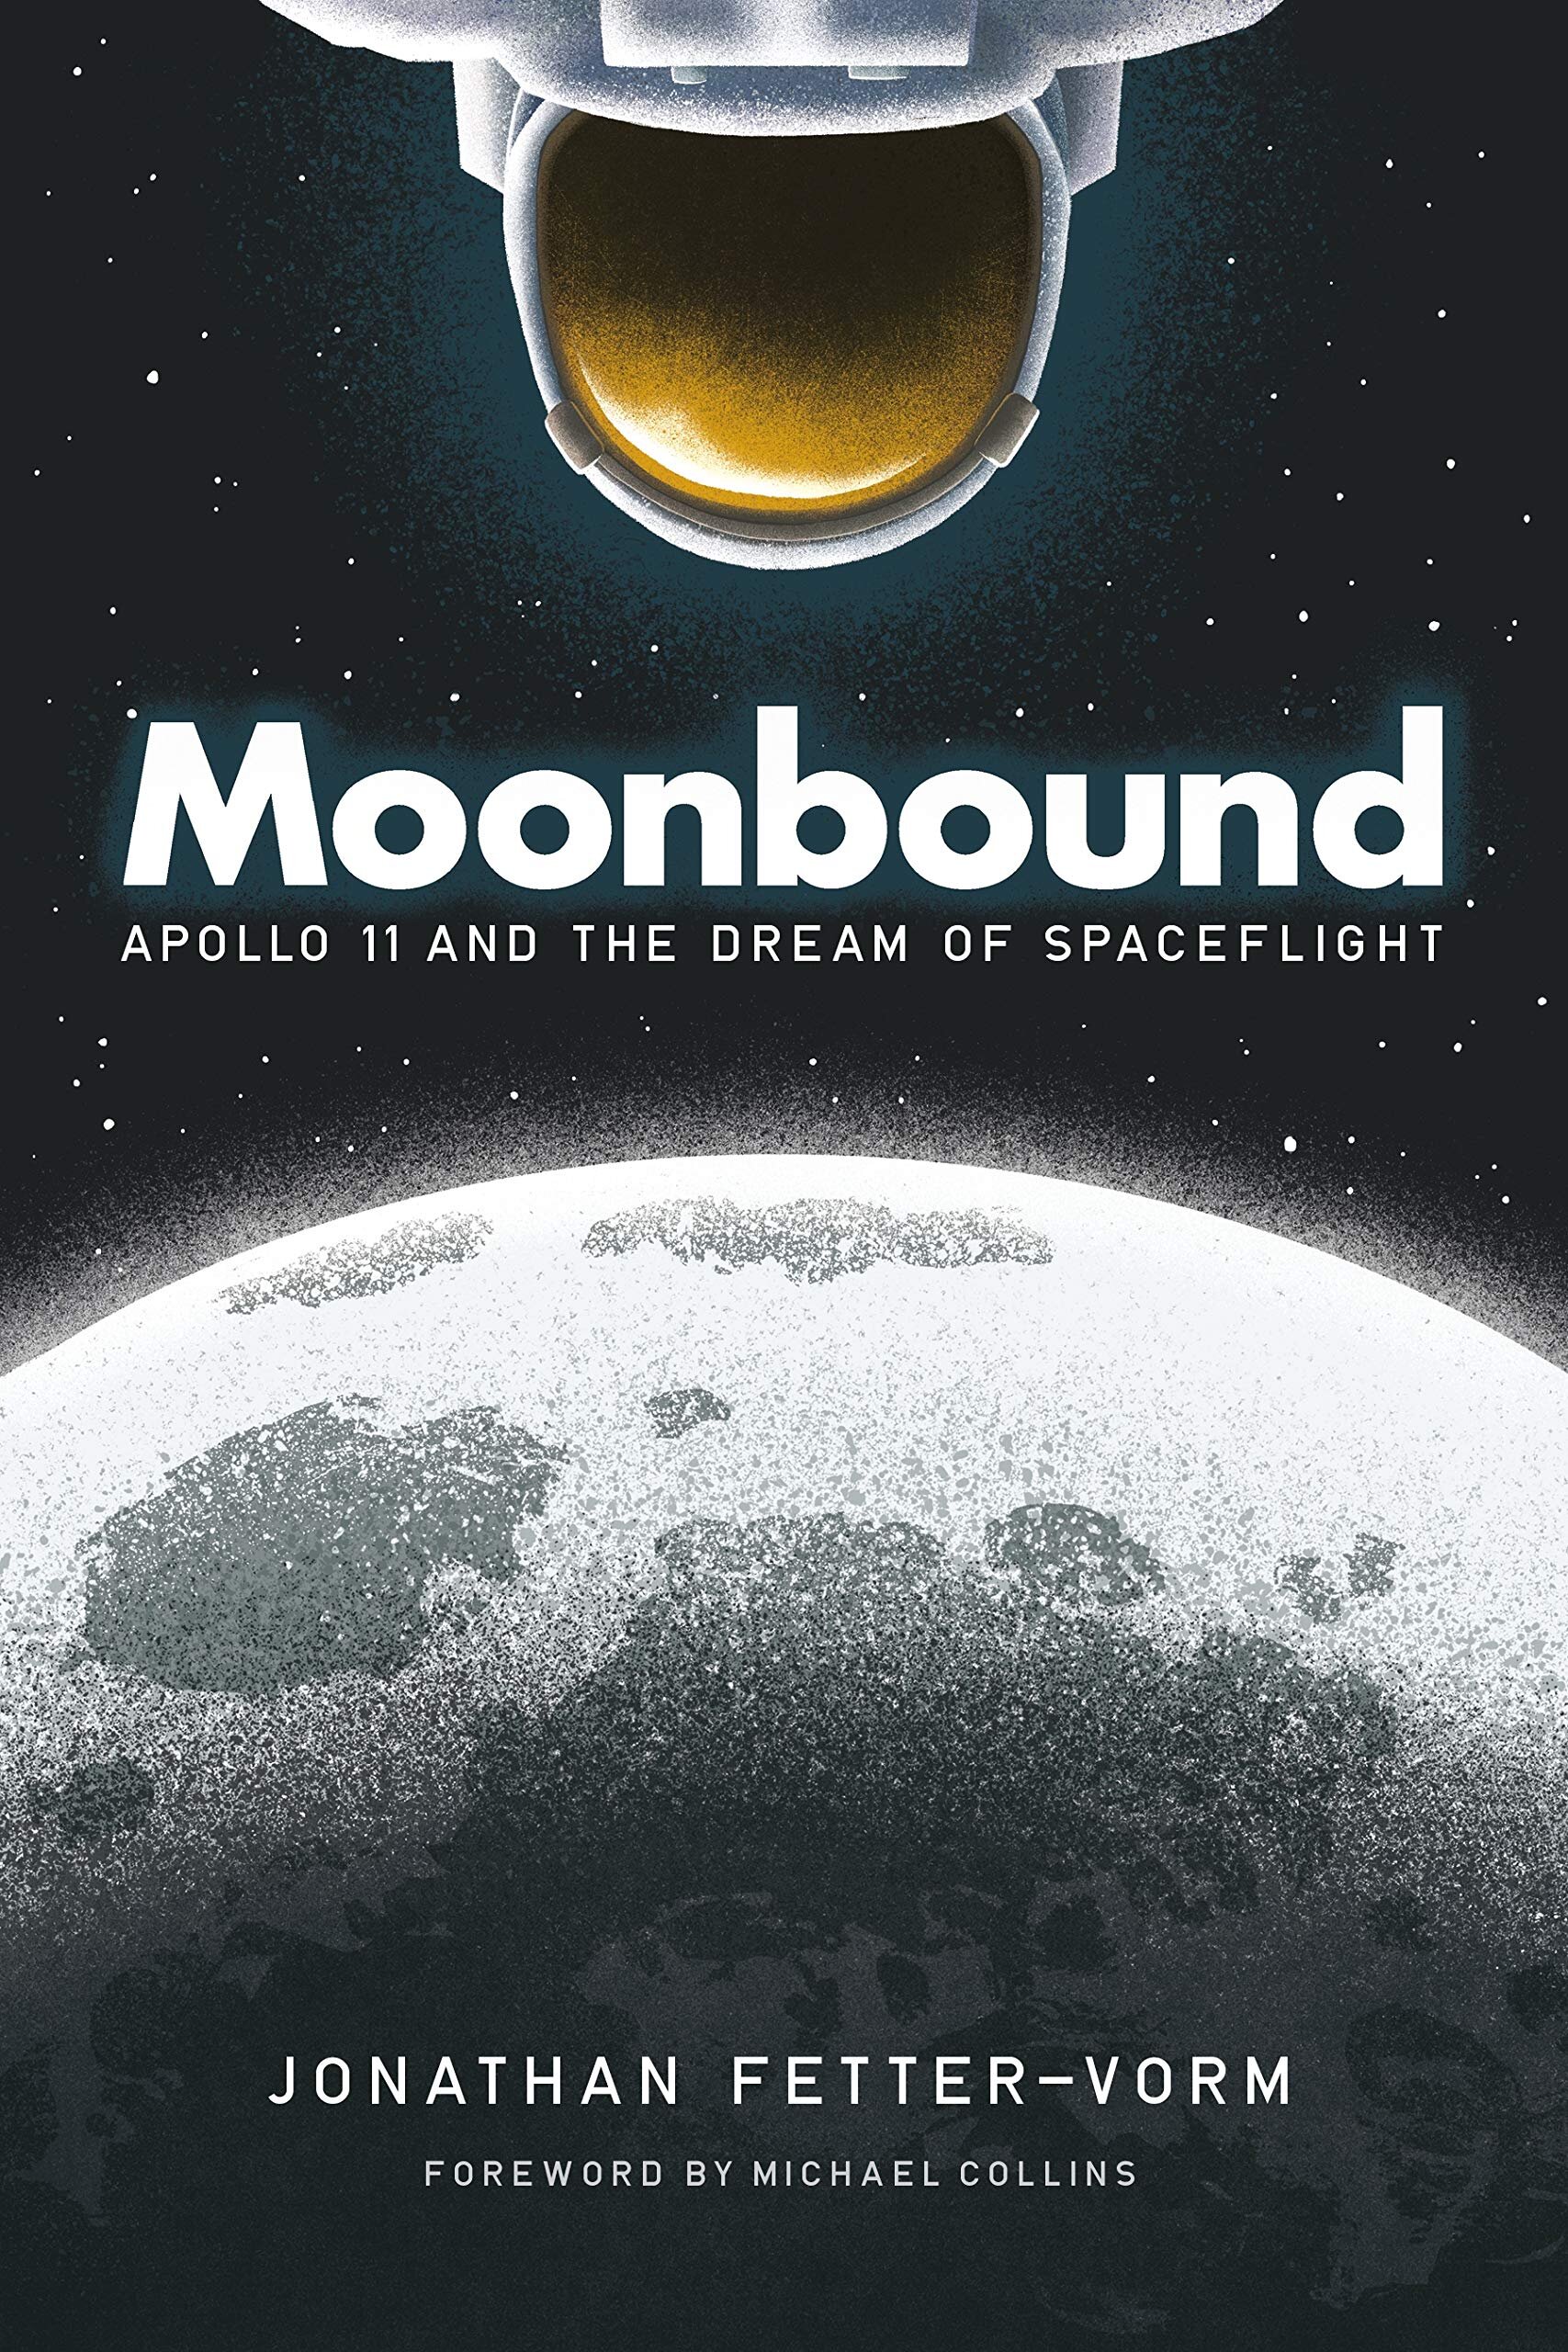 Science Moonbound Apollo 11 and the Dream of Spaceflight by Jonathan Fetter-Vorm.jpg